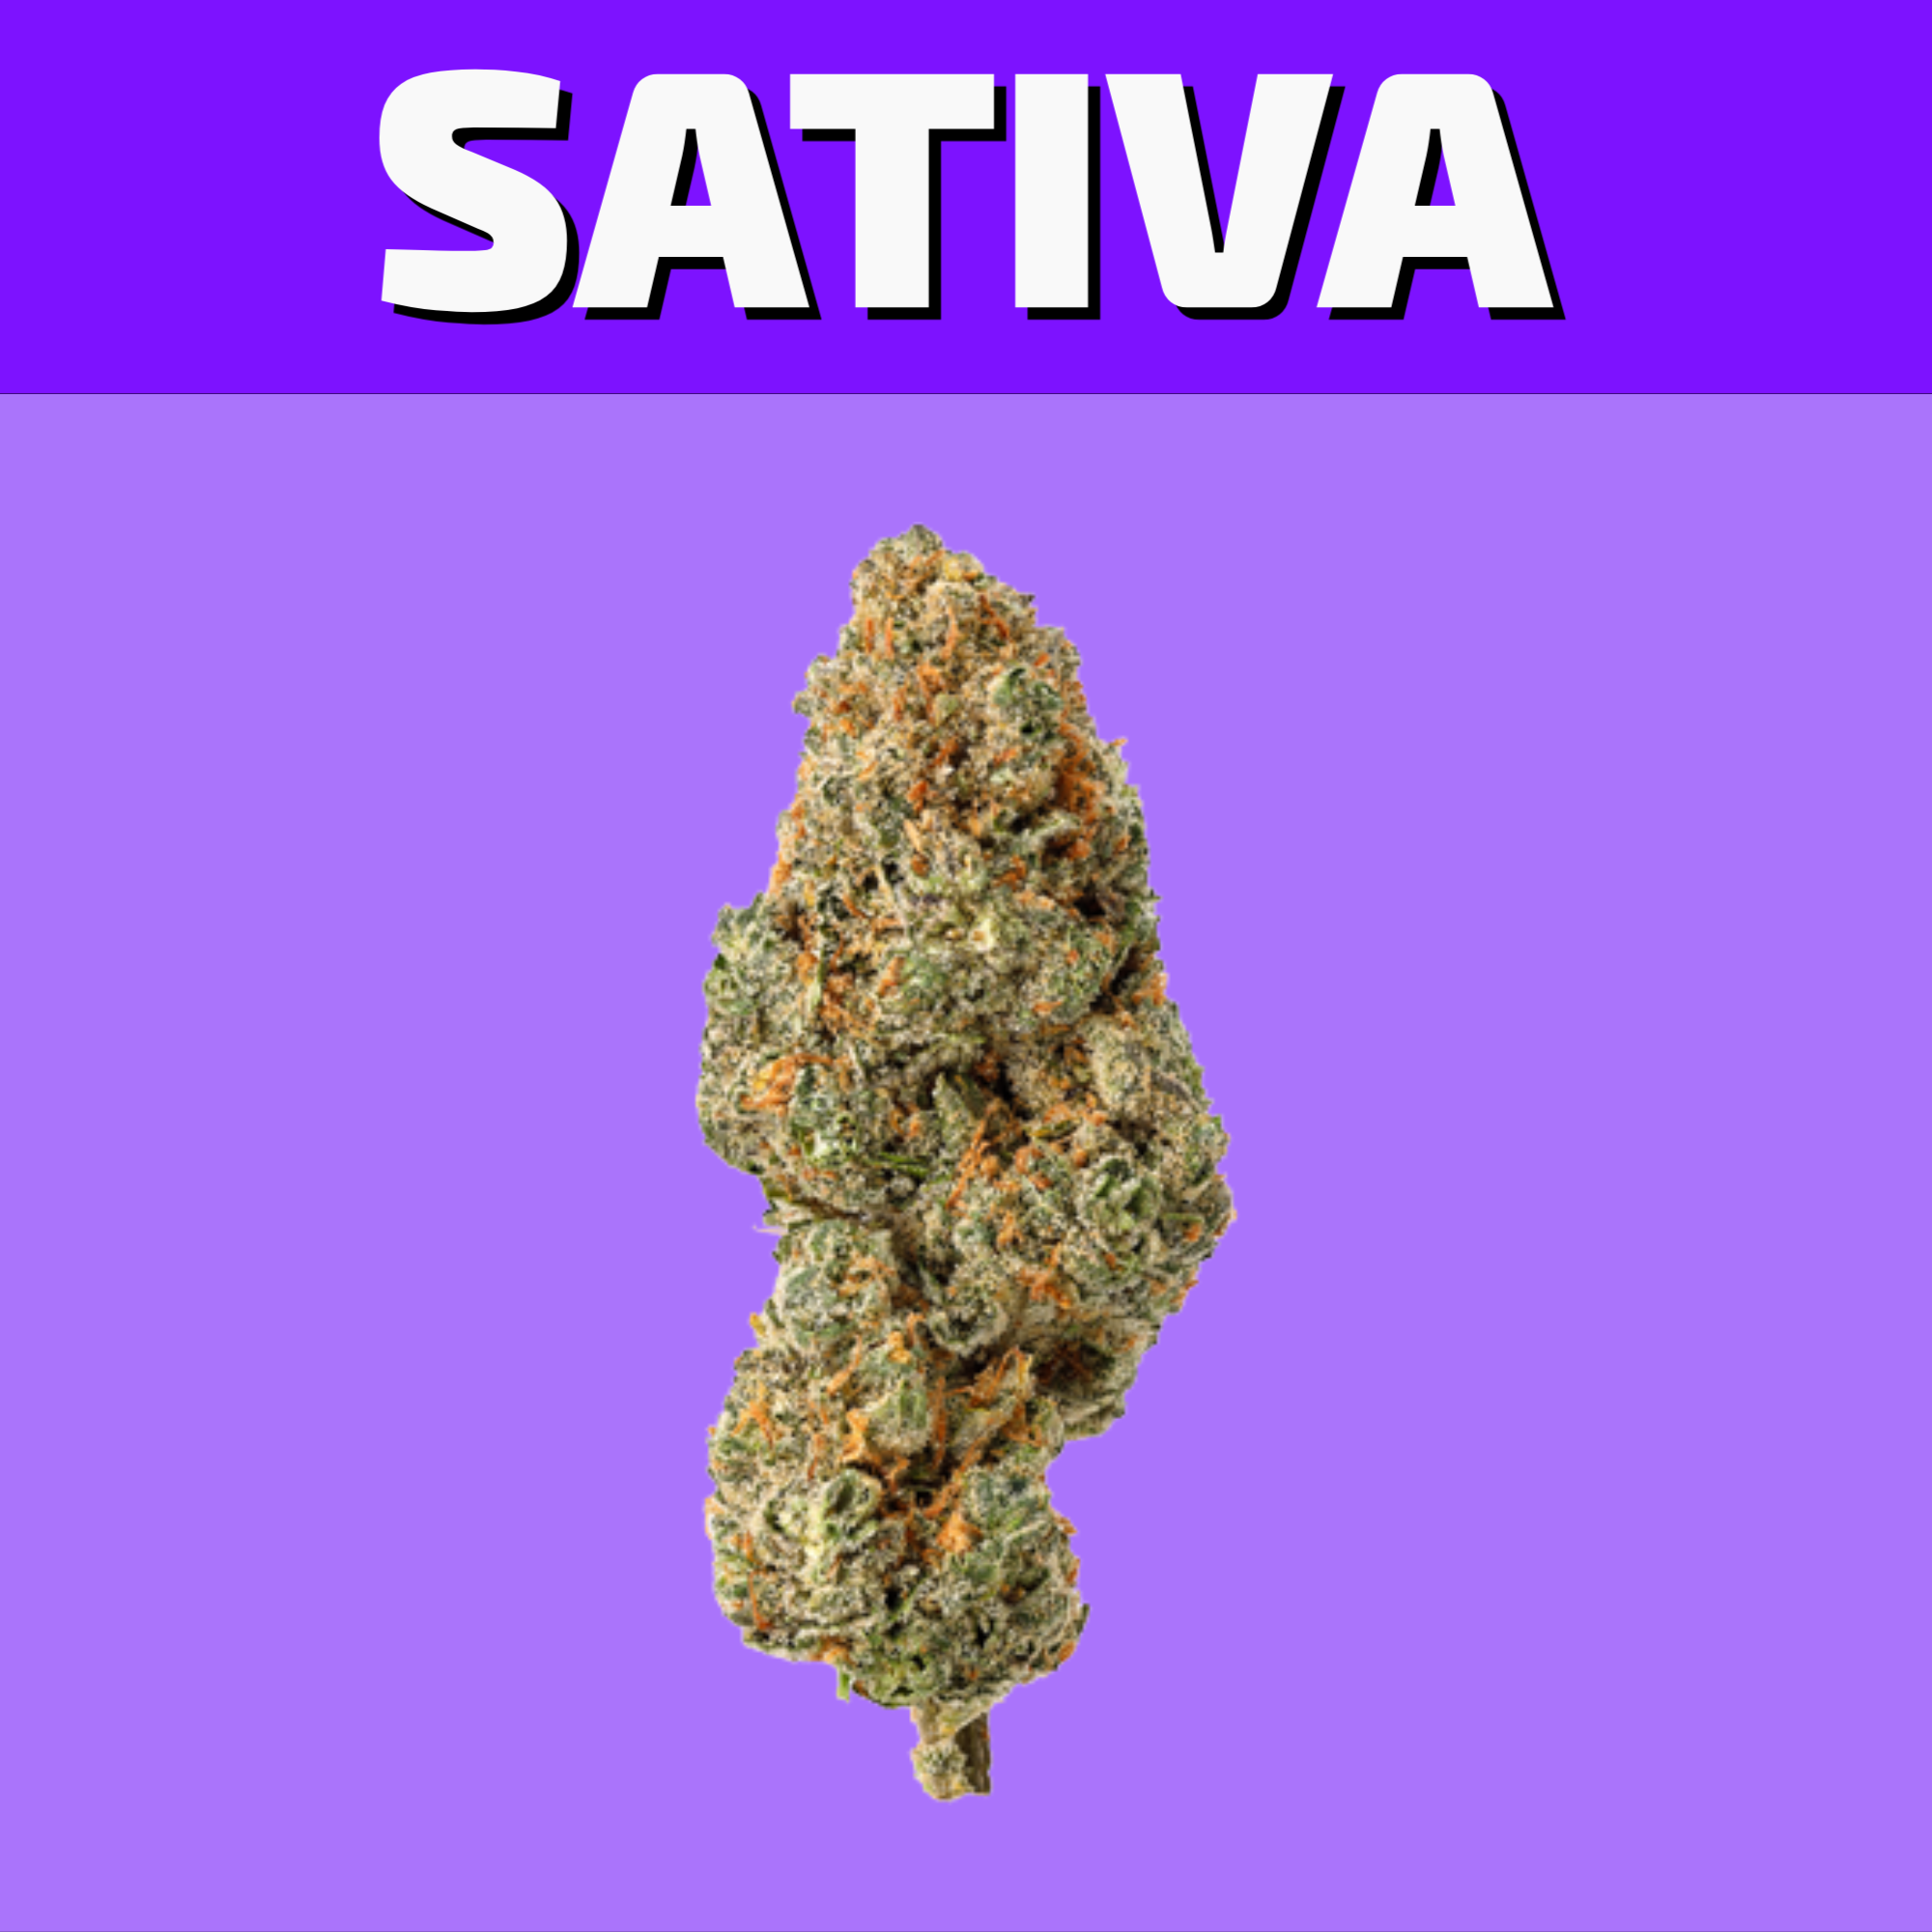 Shop our selection of Sativa Cannabis online and have it delivered same day in Winnipeg or visit our dispensary on 580 Academy Road.